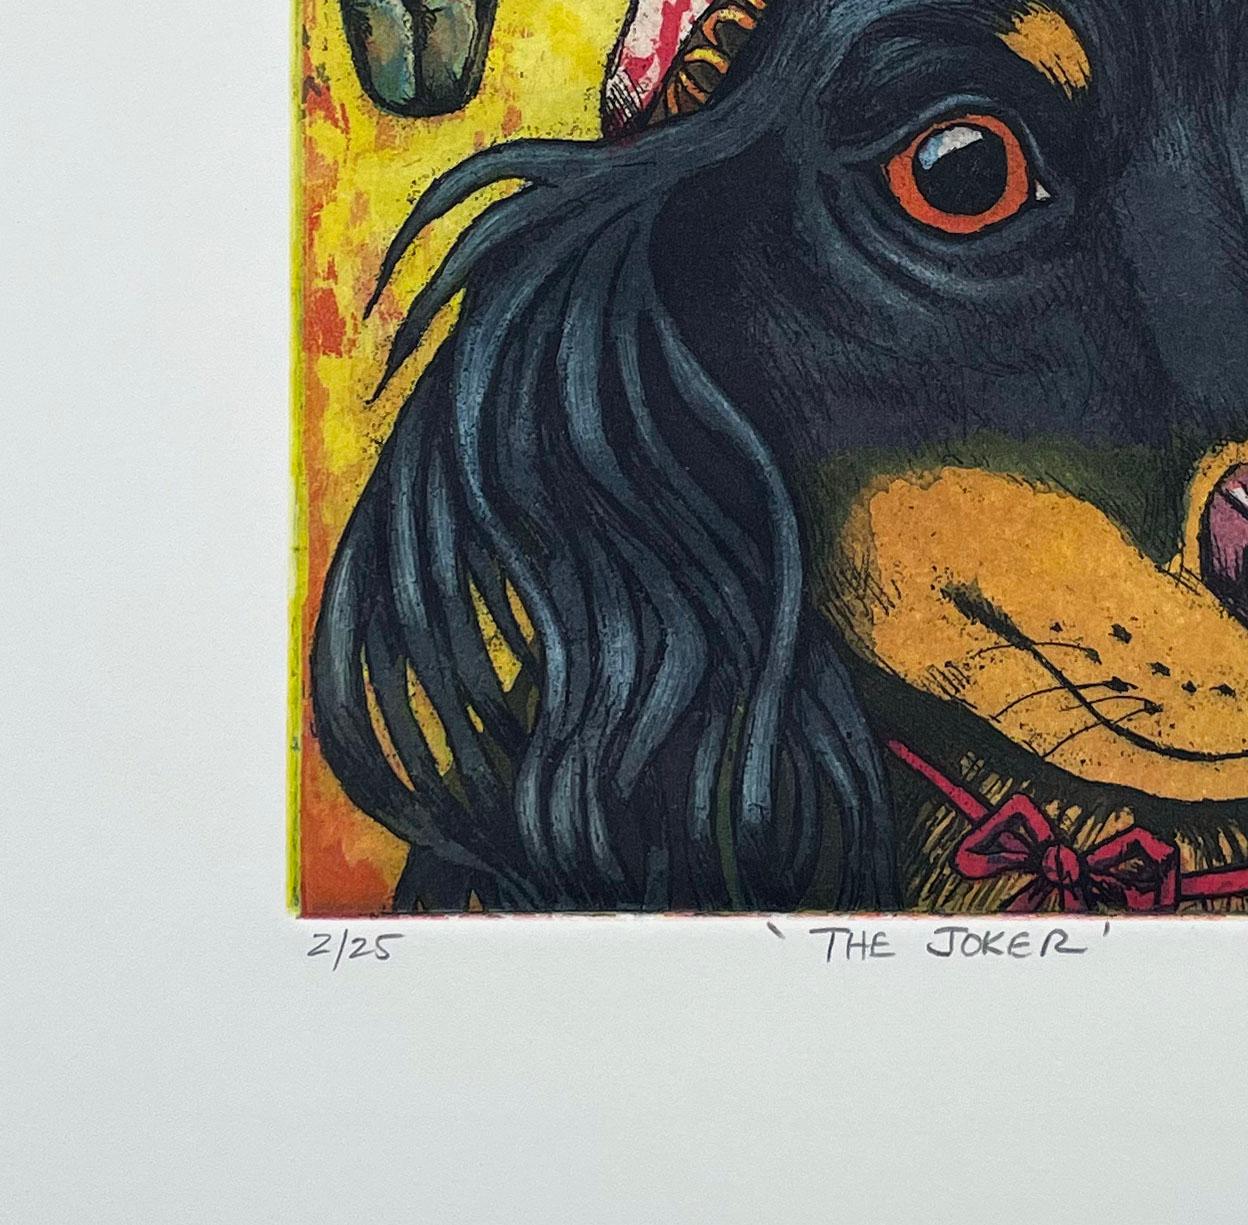 Signed, titled and numbered by the artist. Chicano artist Xavier Viramontes is known for both political subject matter, initmate family scenes and the humor found in this series of dog portraits.

In the 1970's, Viramontes worked with the Galeria De